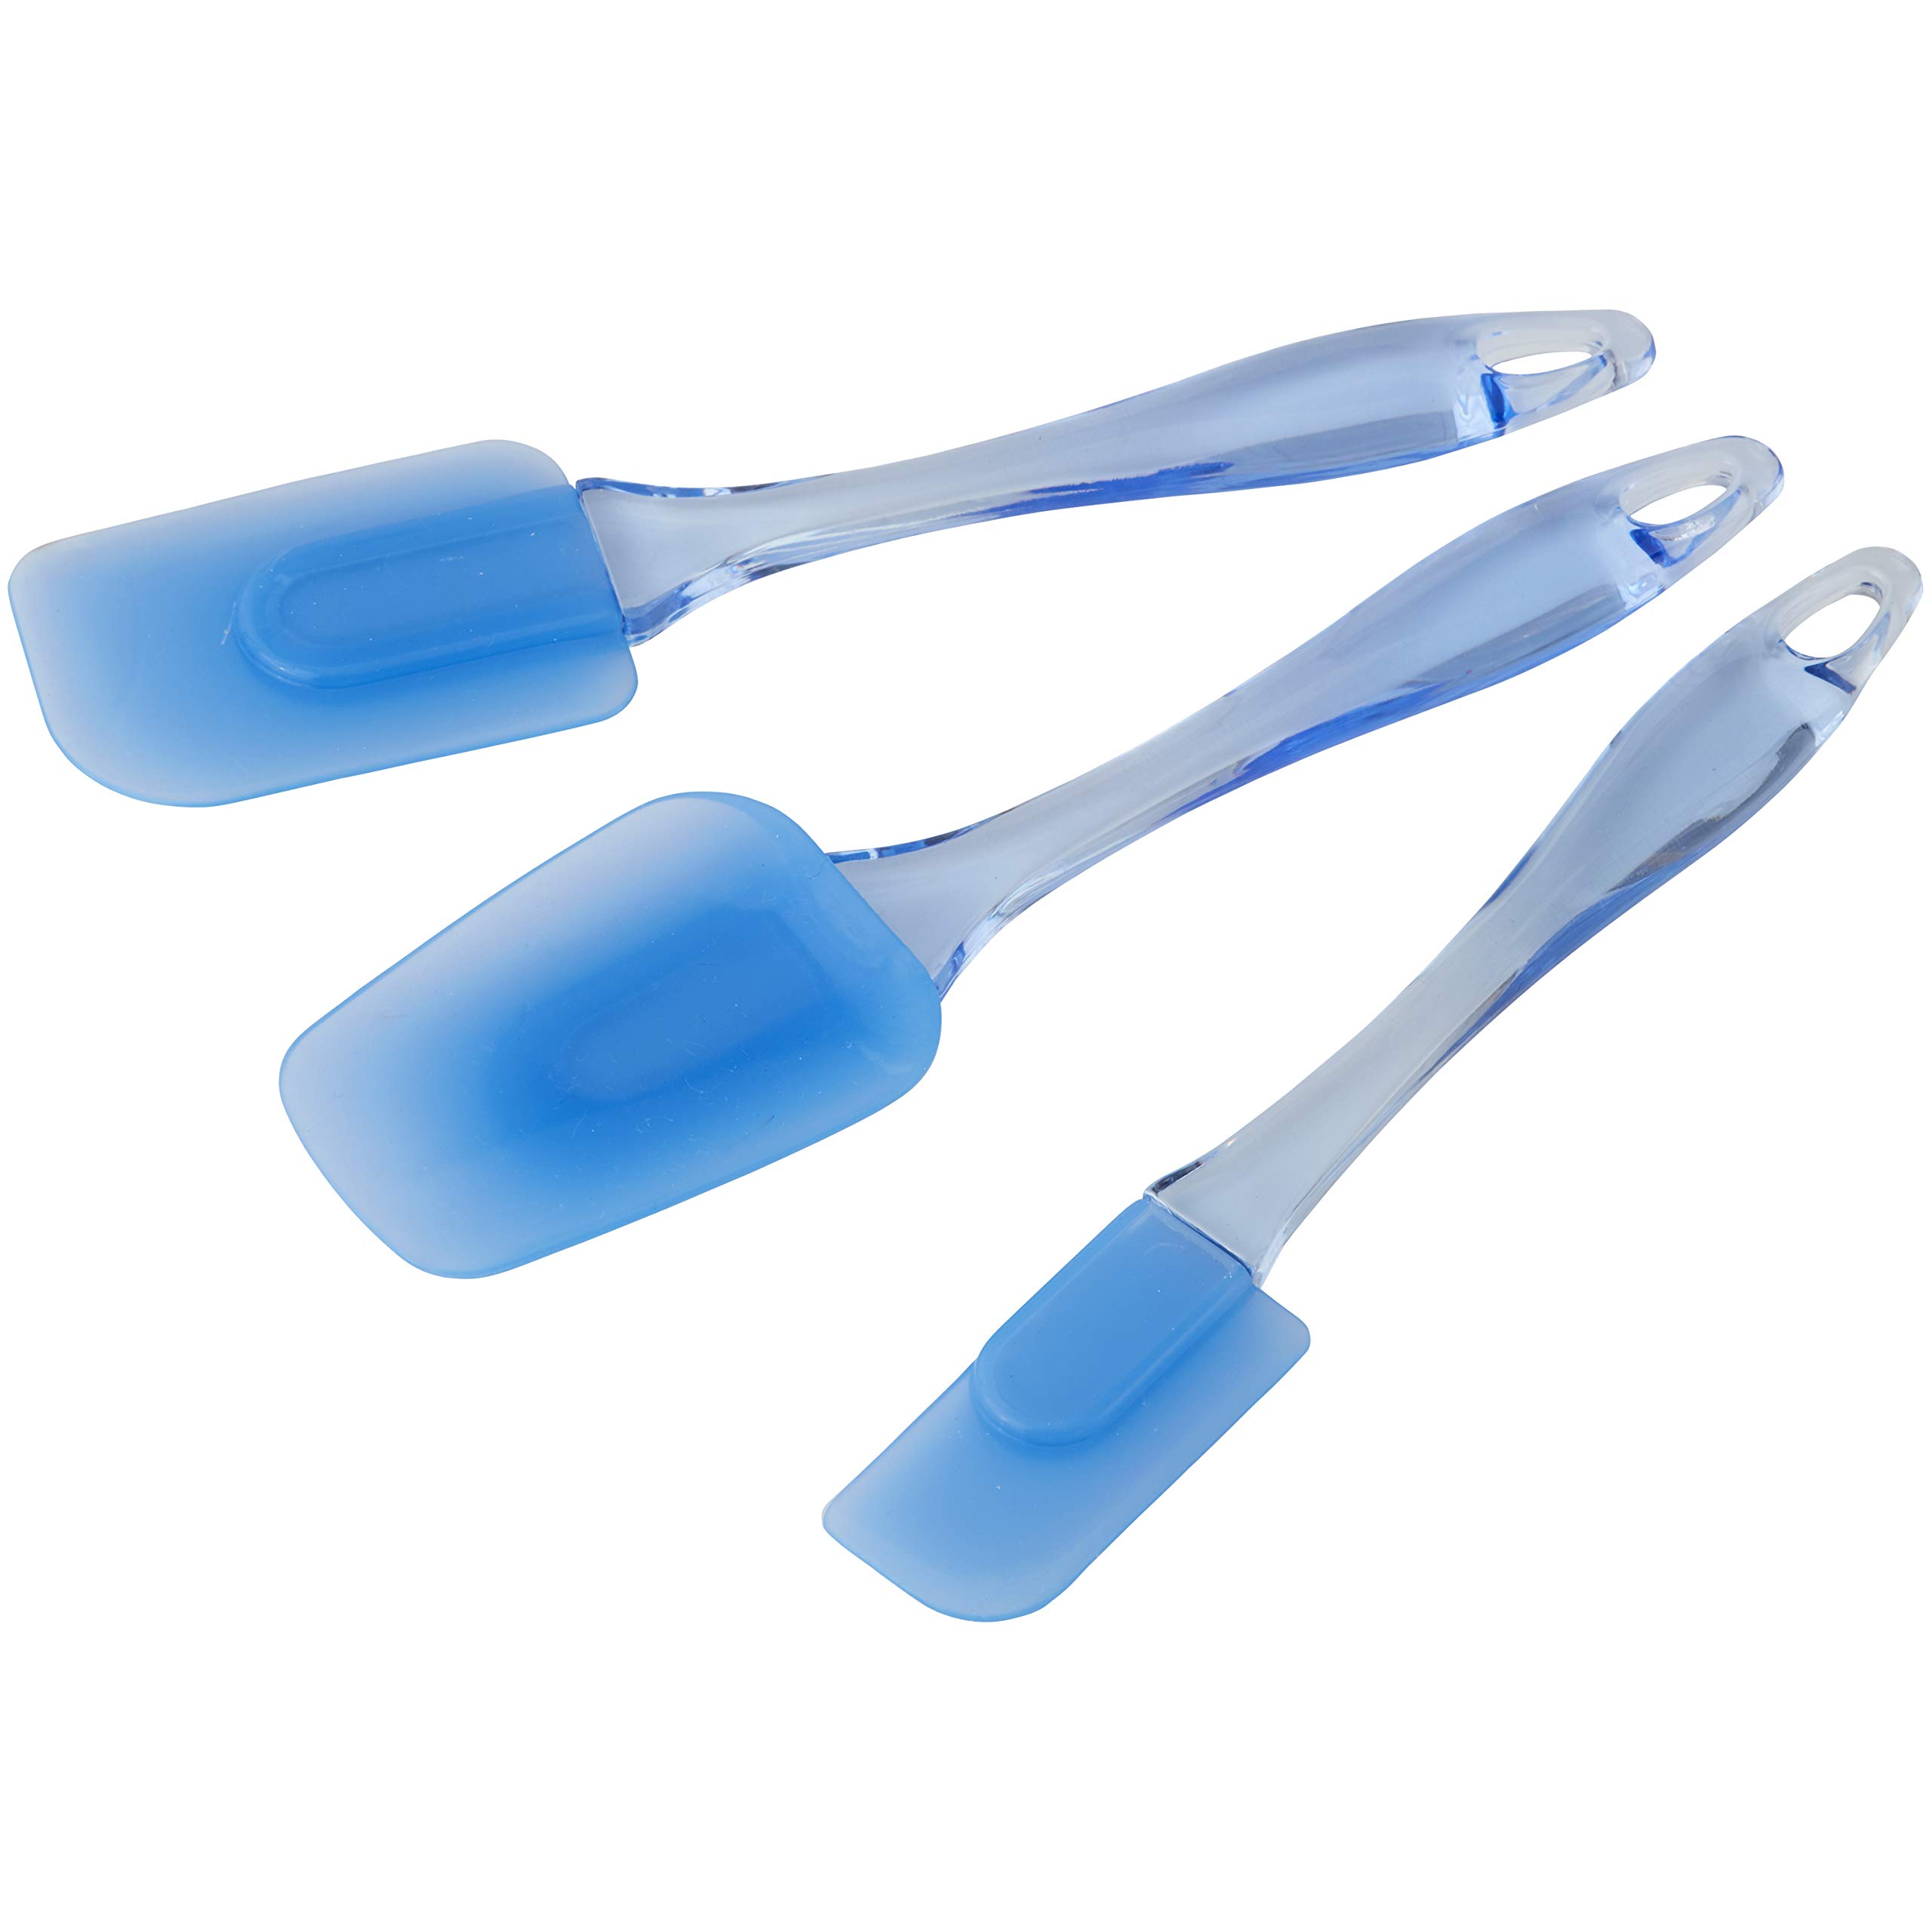 Wilton Easy Flex Silicone Spatula Set, Your Go-To Tools for Mixing, Folding, Scraping, Cooking and Serving., Blue, 3-Piece